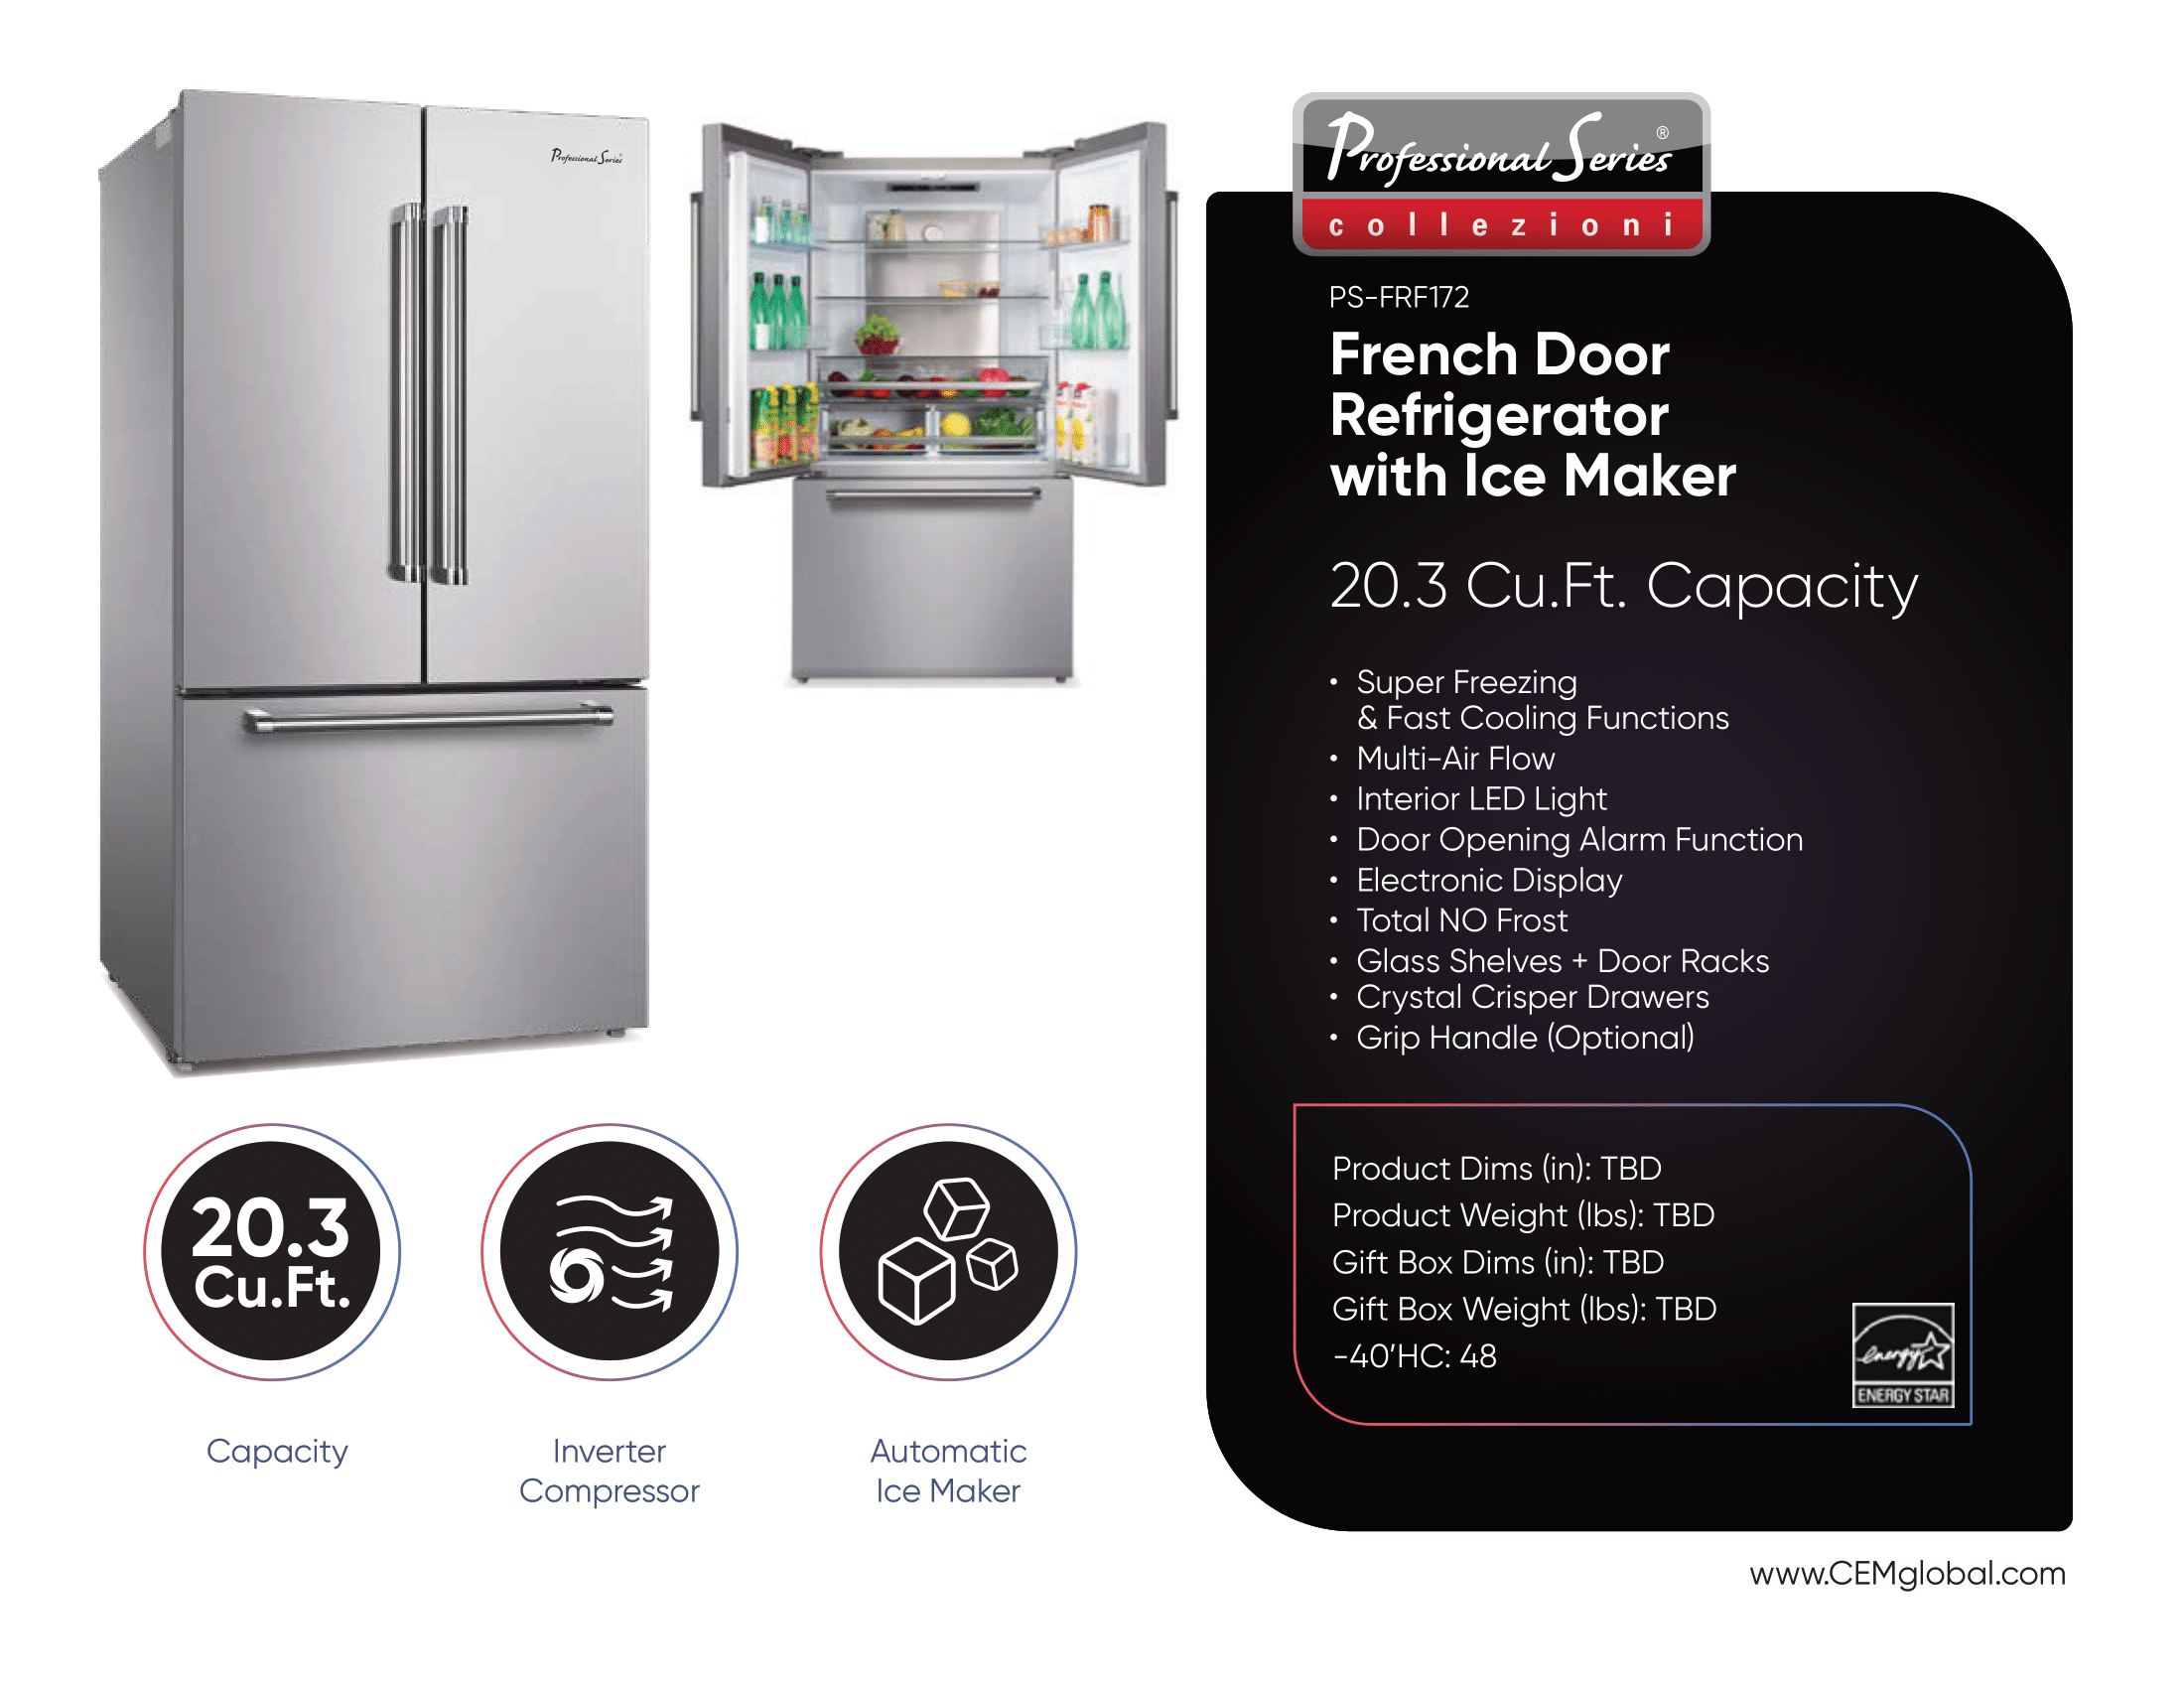 French Door Refrigerator with Ice Maker 20.3 Cu.Ft.